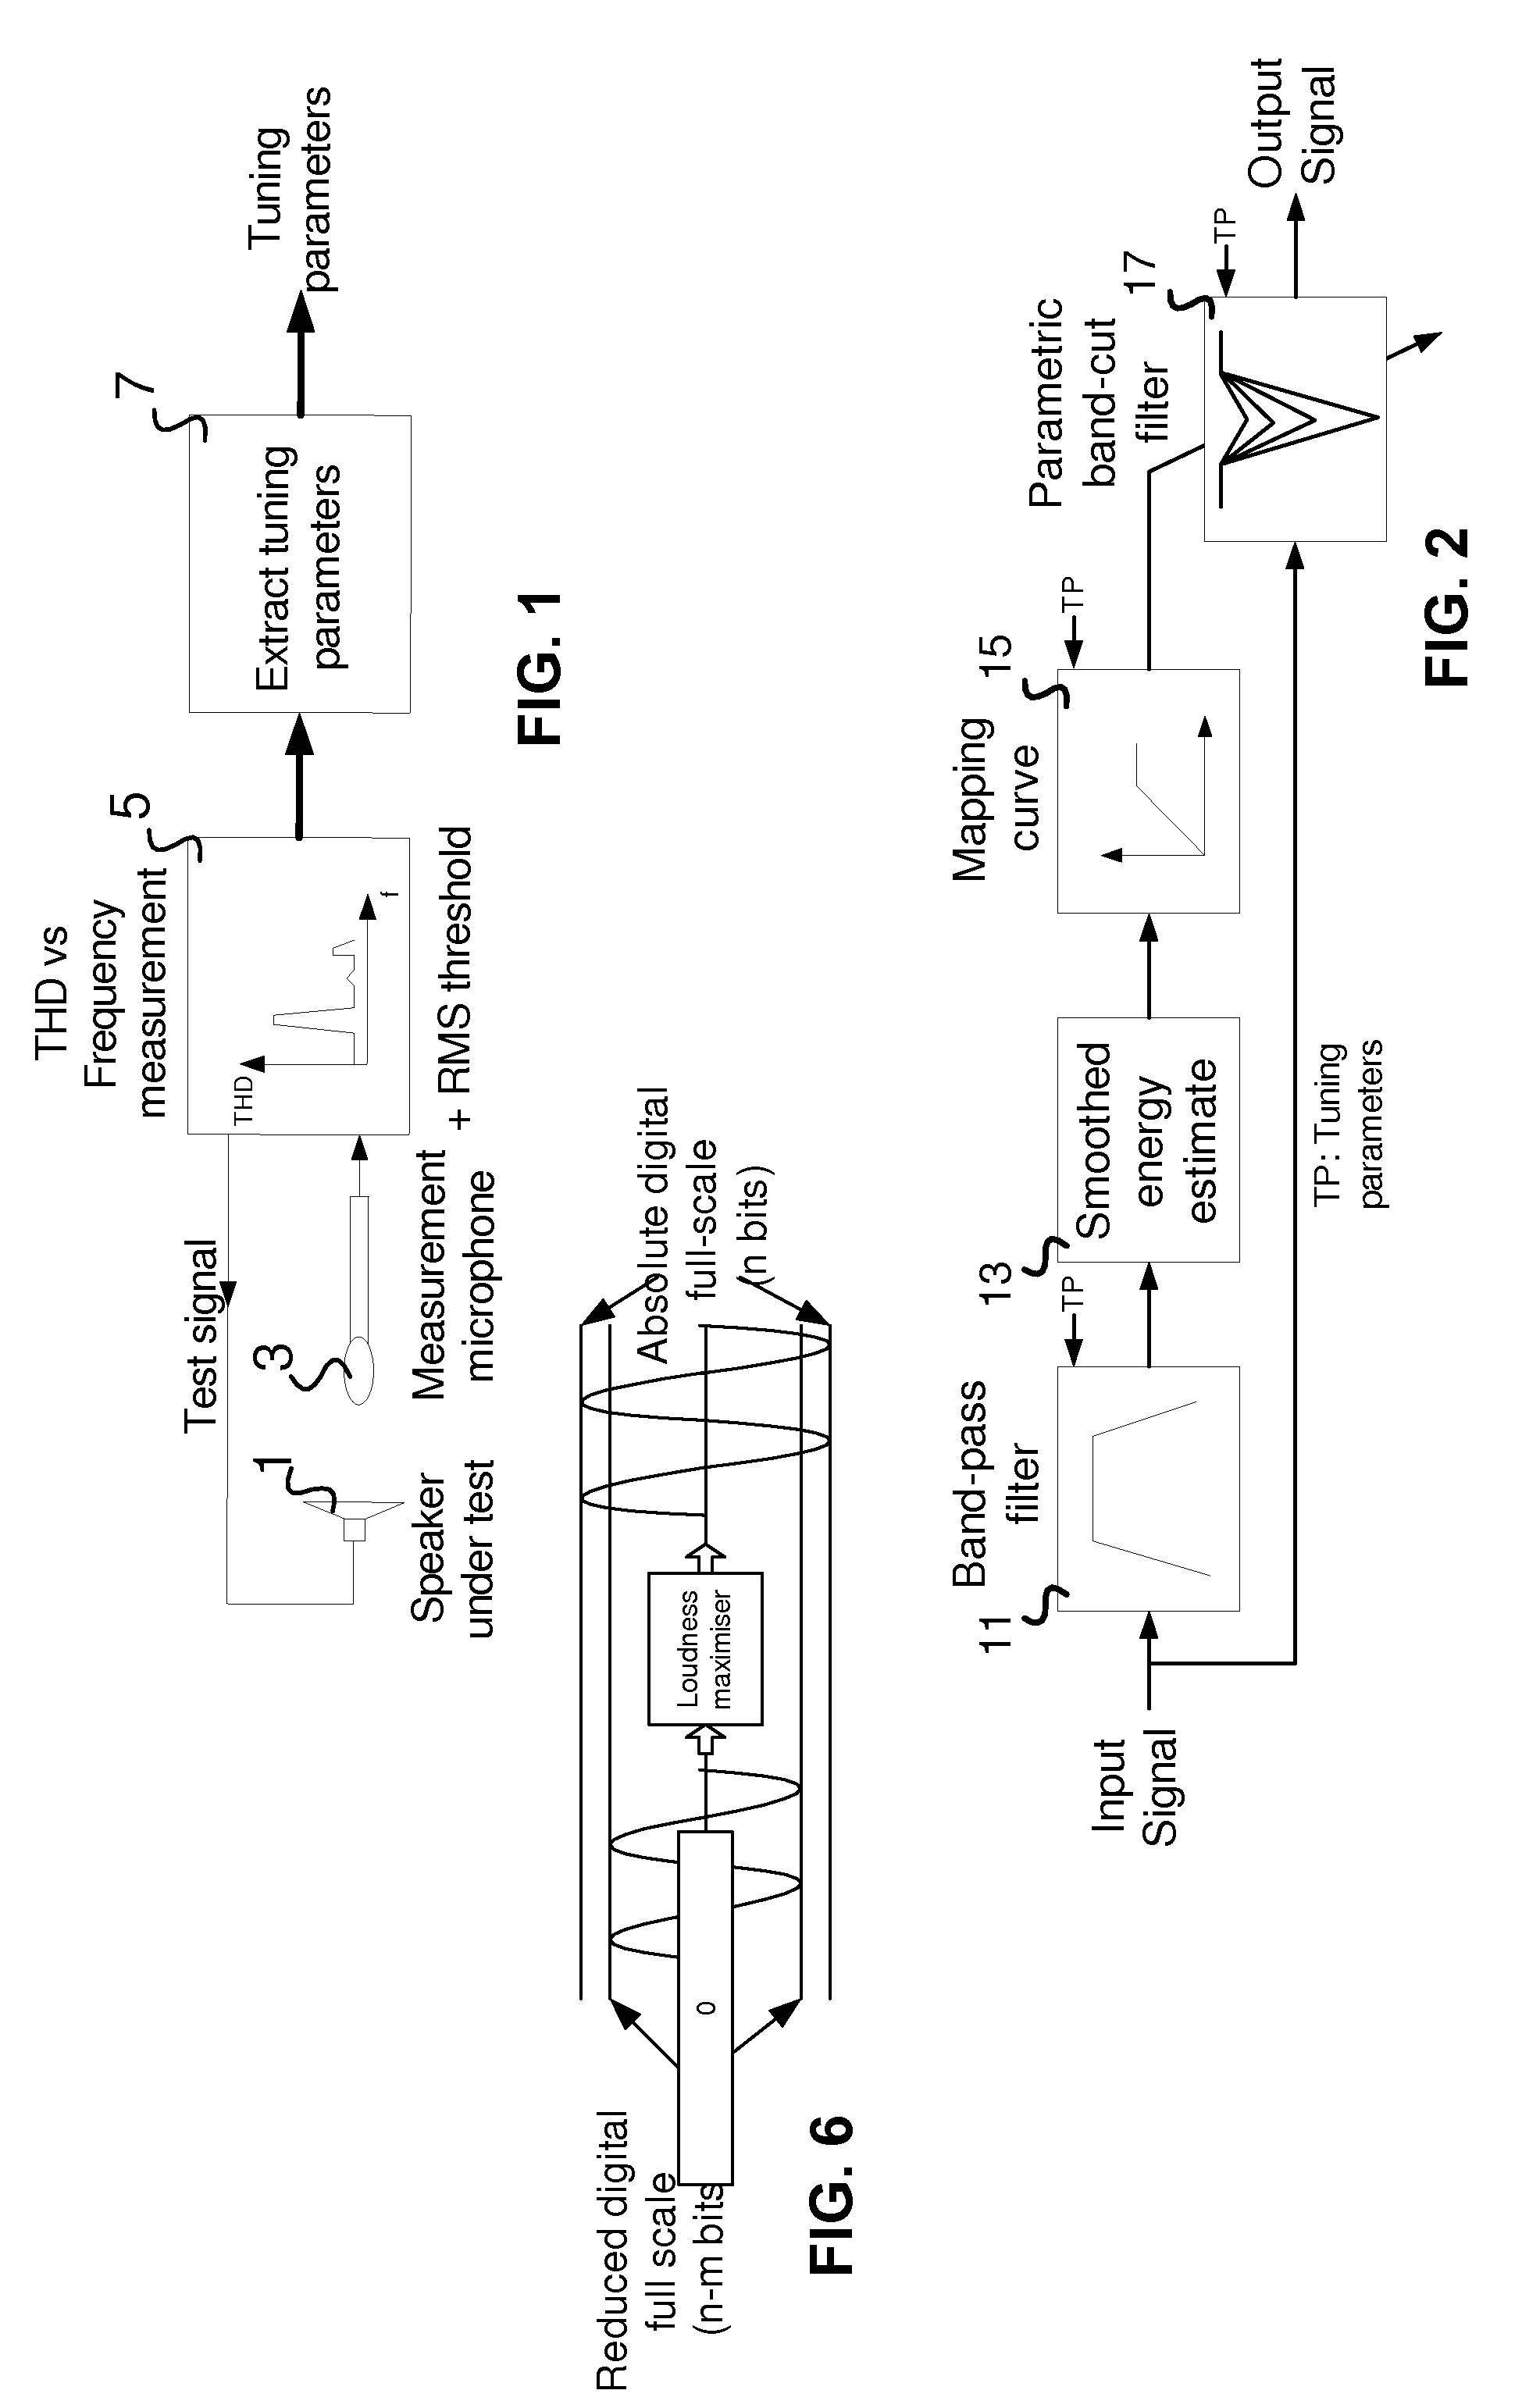 Method and system for controlling distortion in a critical frequency band of an audio signal